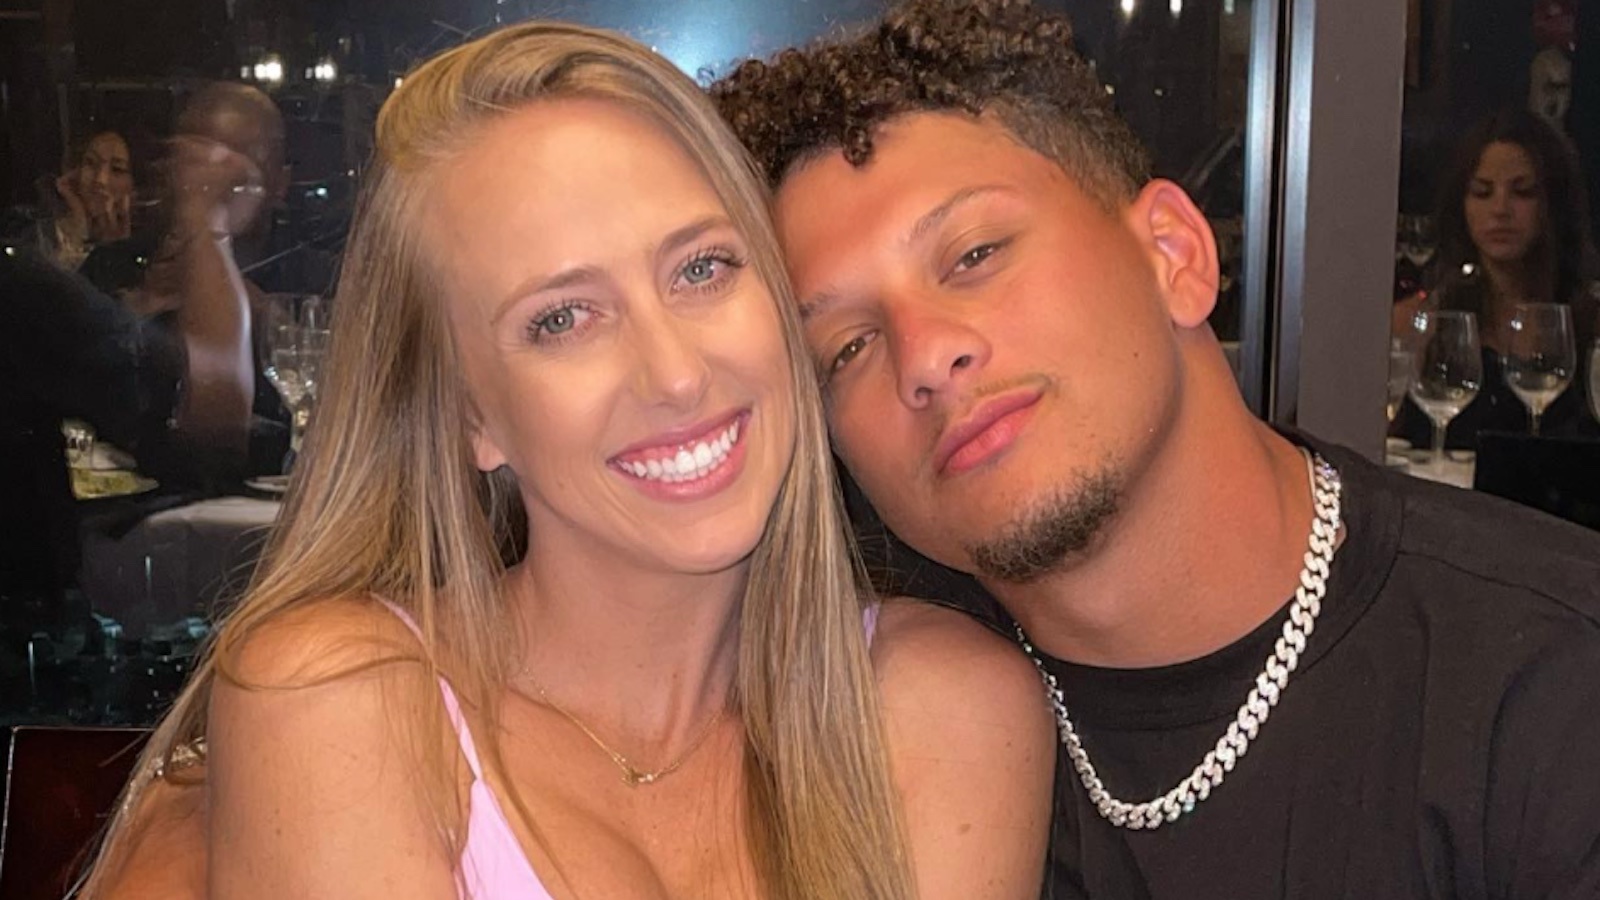 Brittany Matthews watches Chiefs win with Patrick Mahomes' cousin